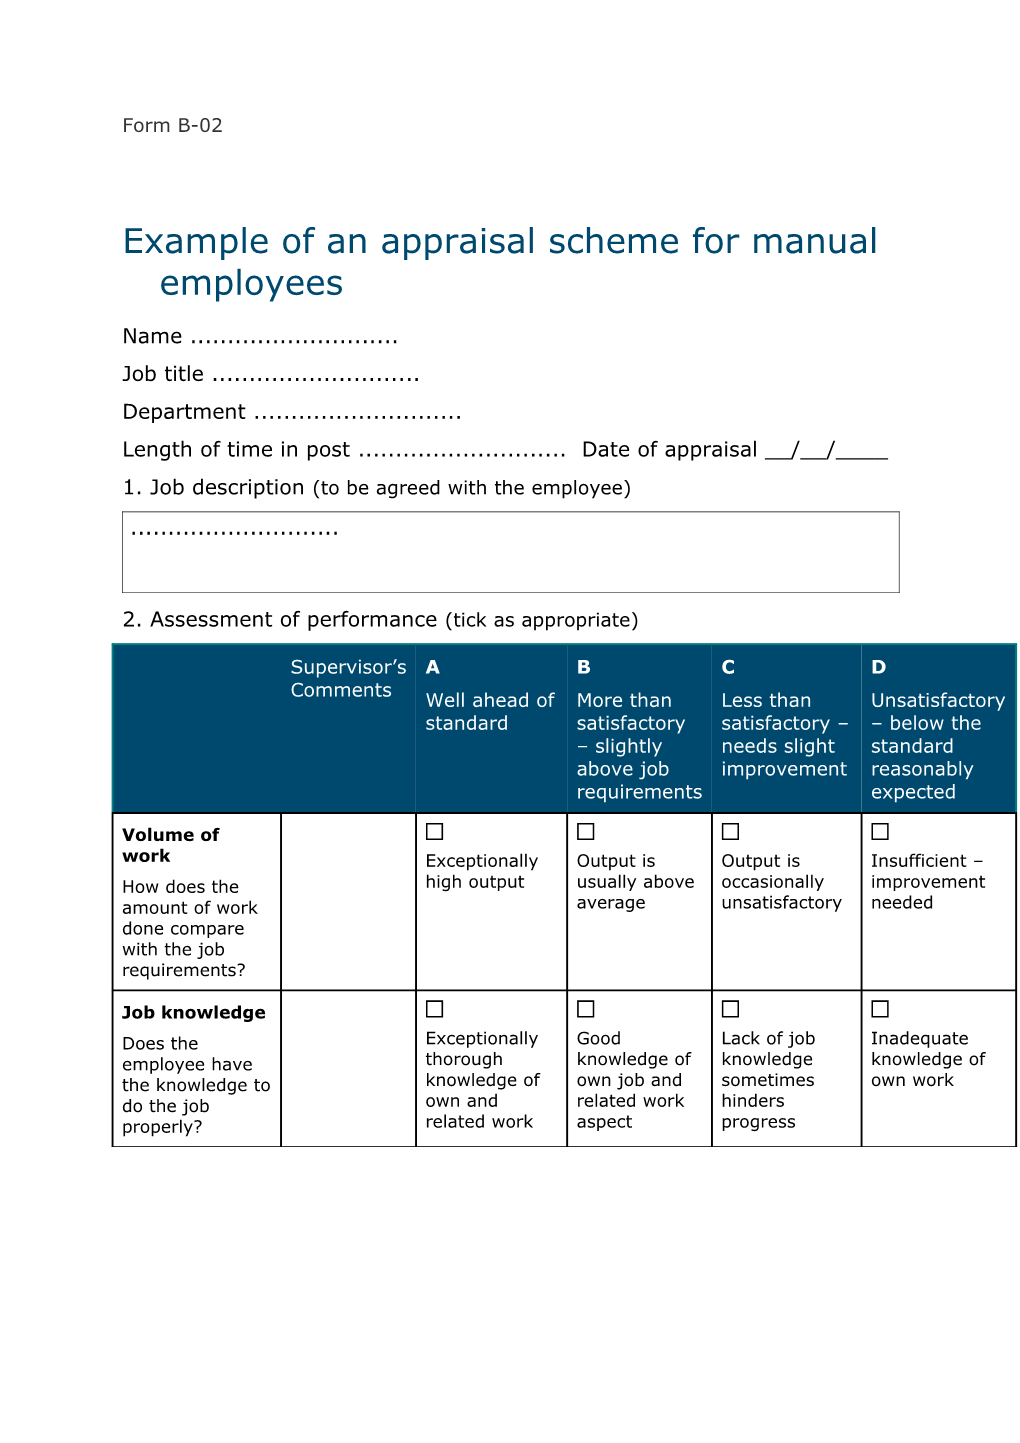 B2 Example of an Appraisal Scheme for Manual Employees